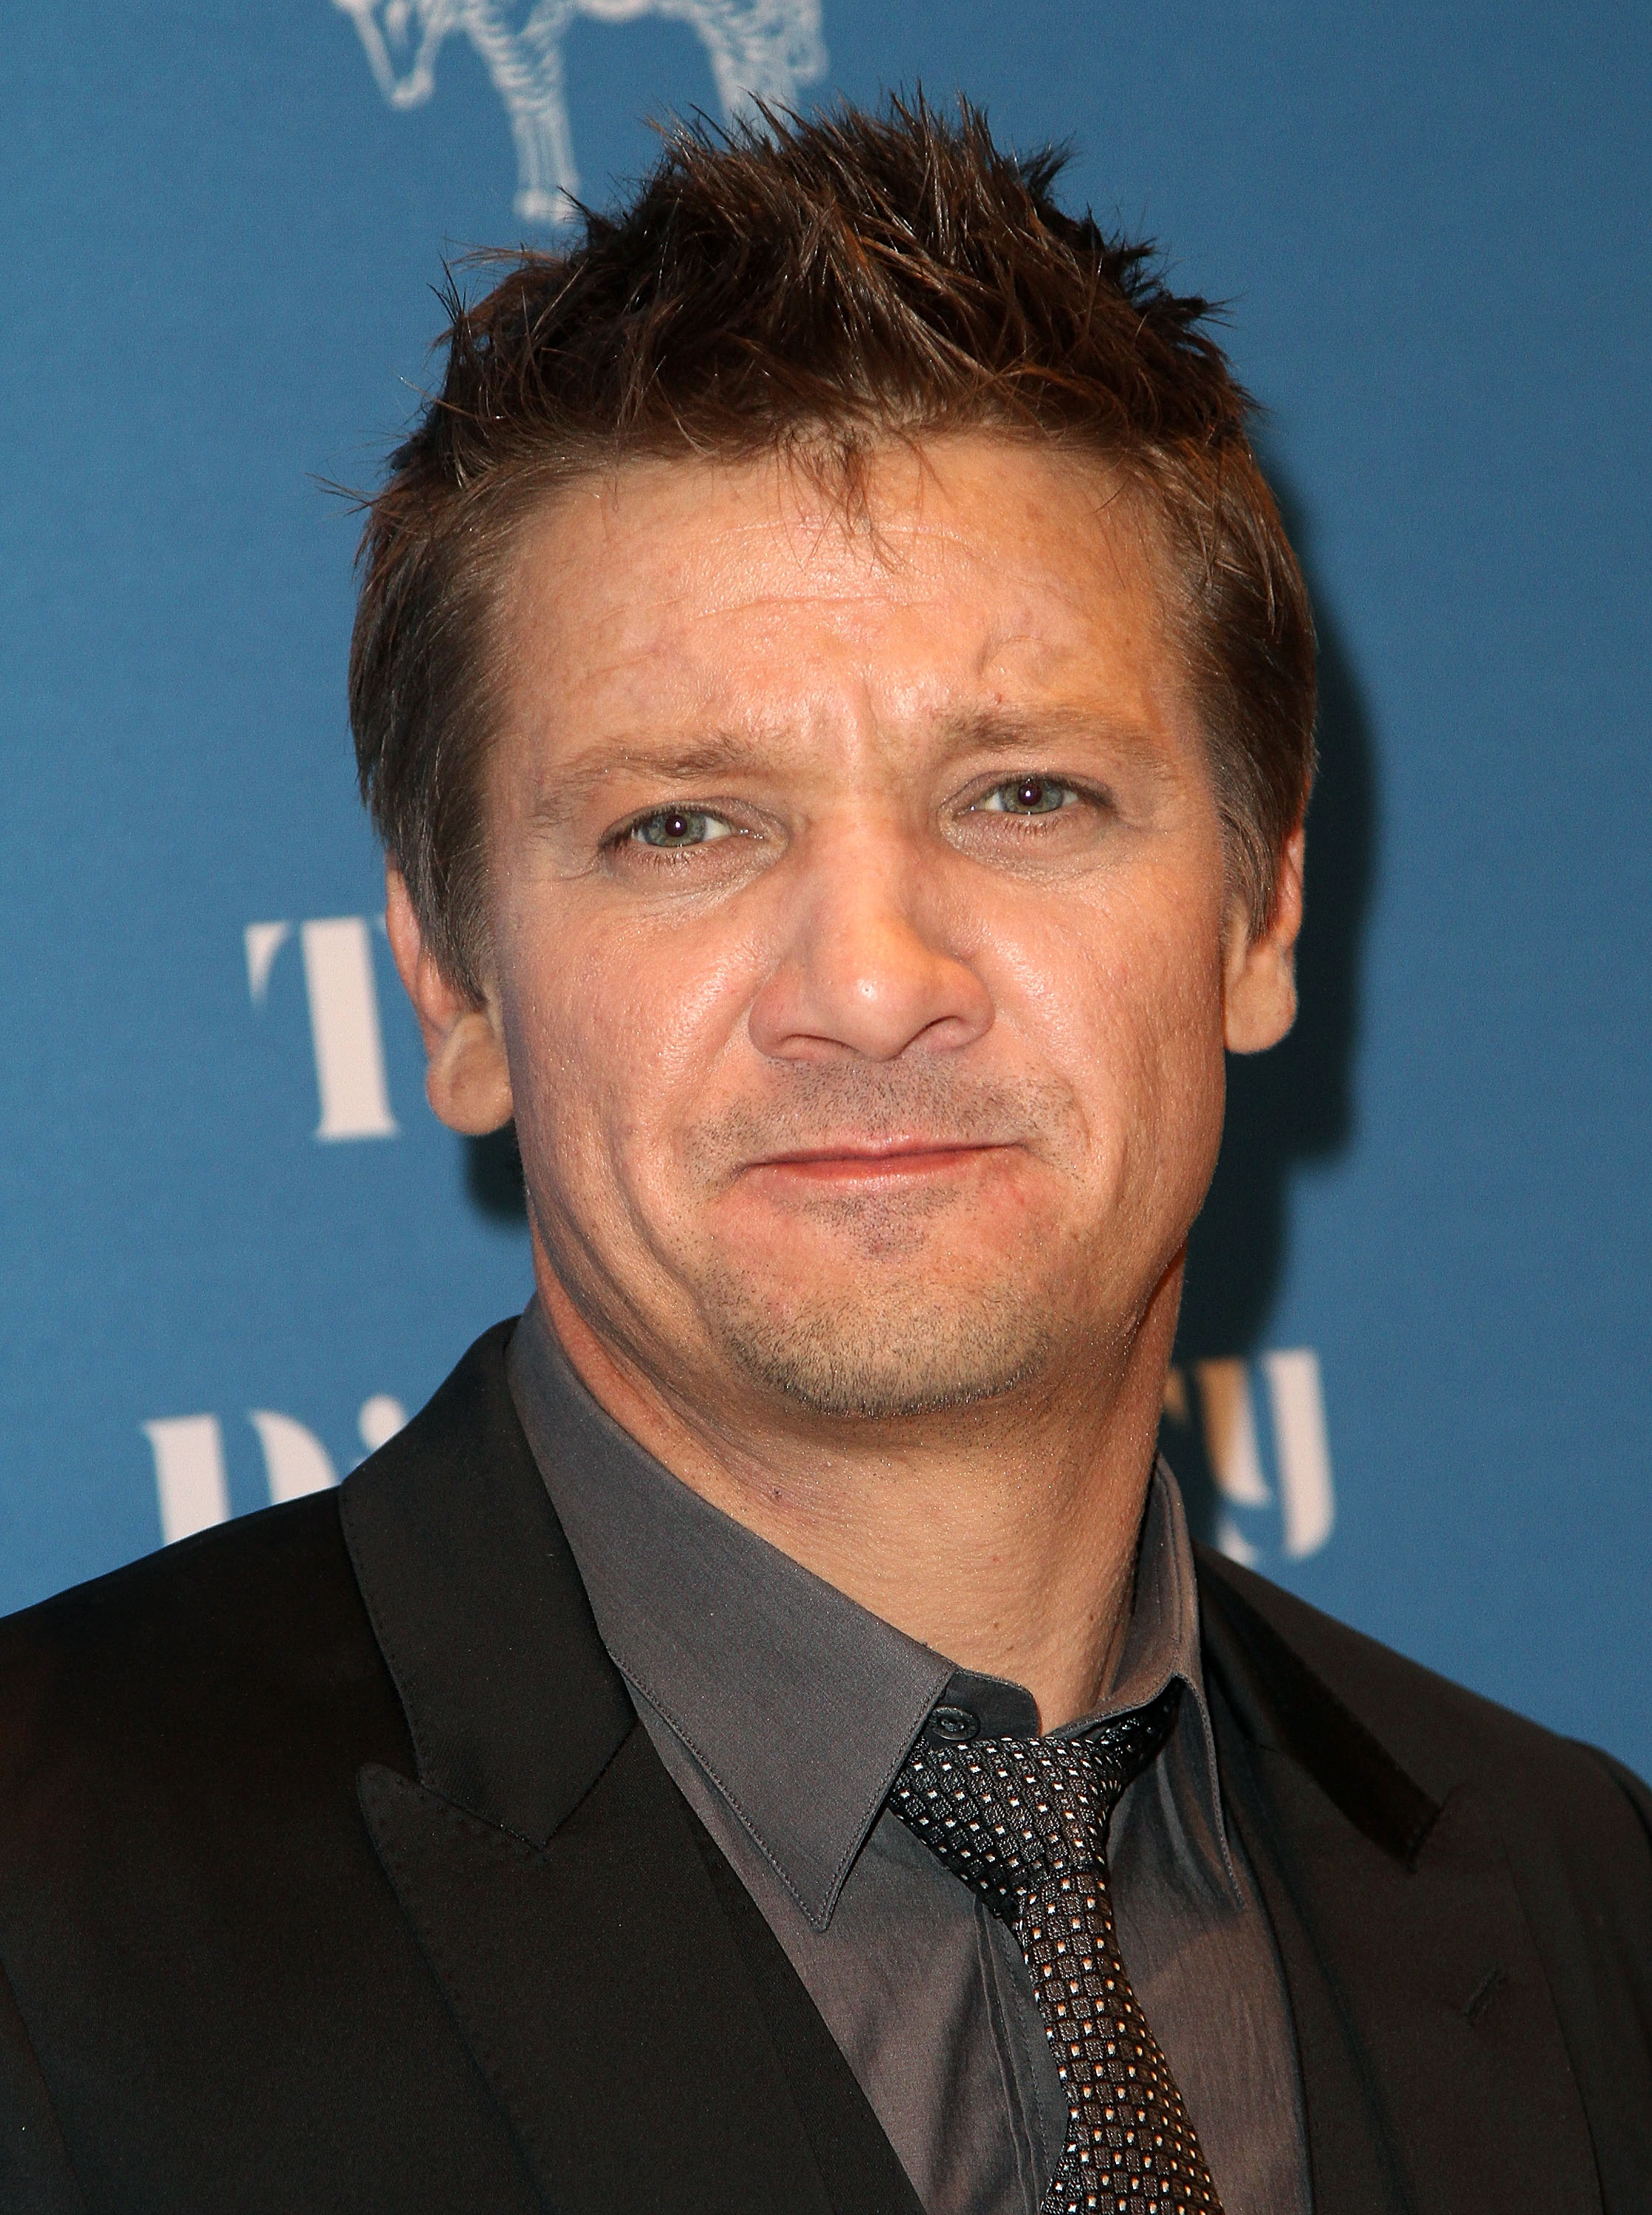 Jeremy Renner at the Launch of Jeff Vespa's new book "The Art Of Discovery" in Beverly Hills, Ca. on Oct. 23, 2014.